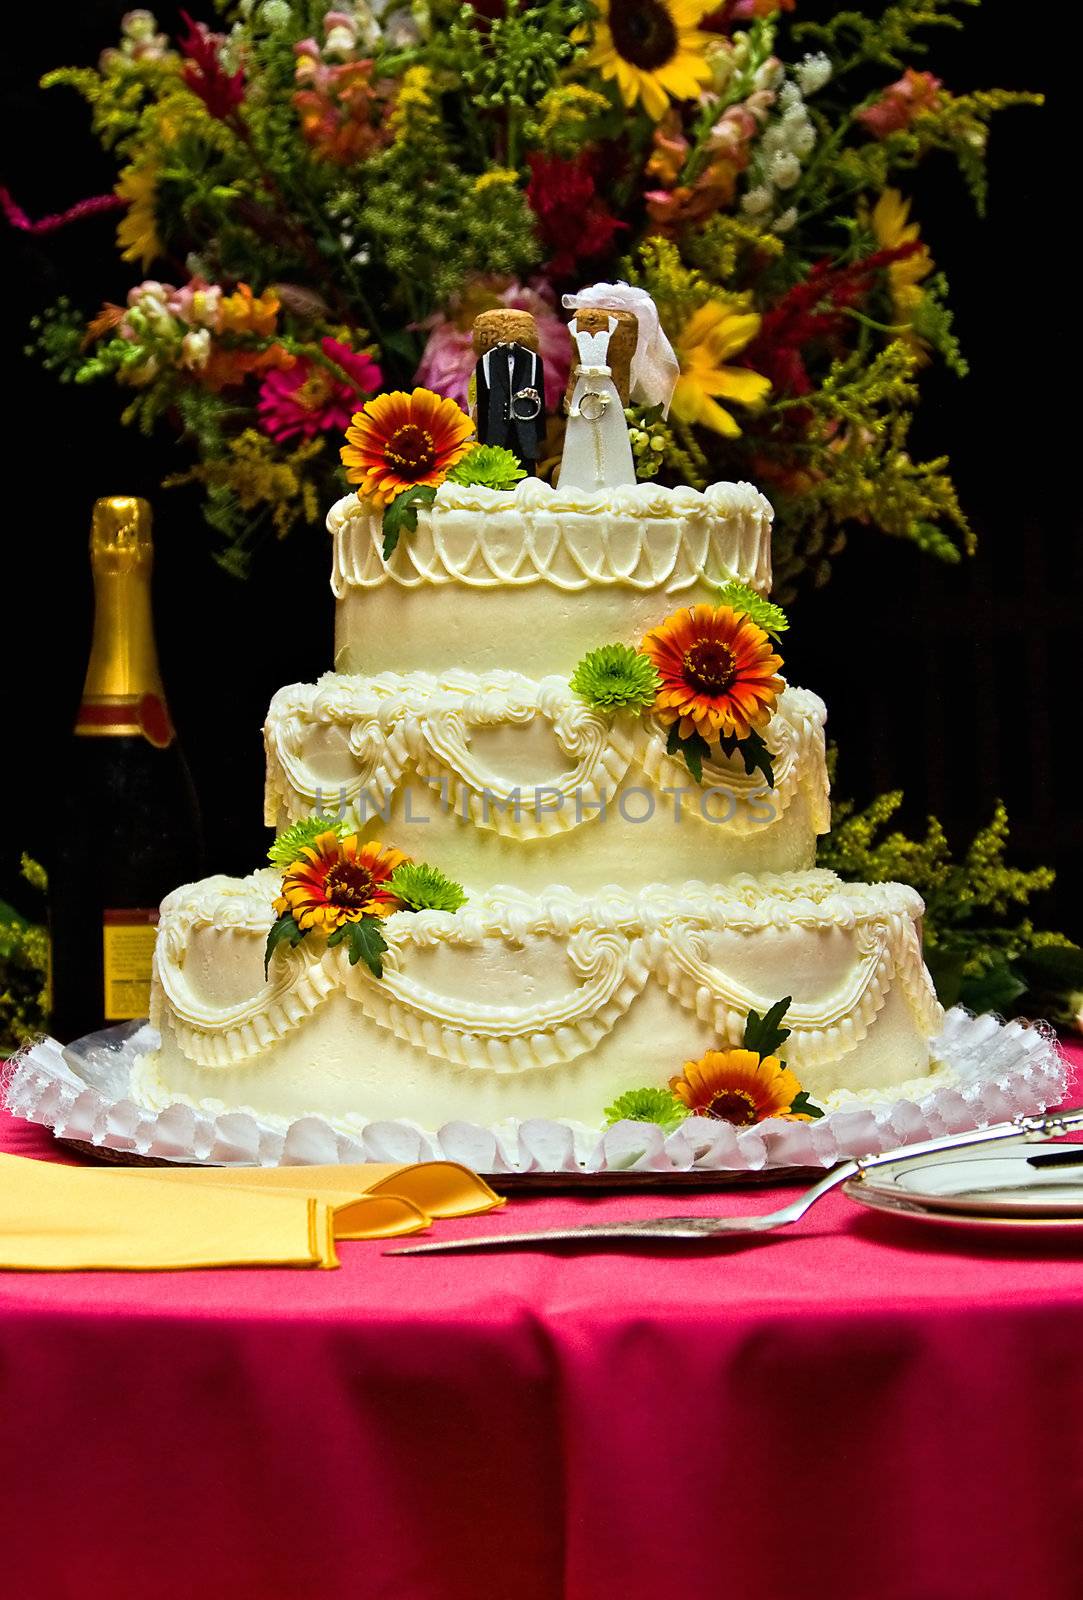 Wedding cake with flowers by phakimata